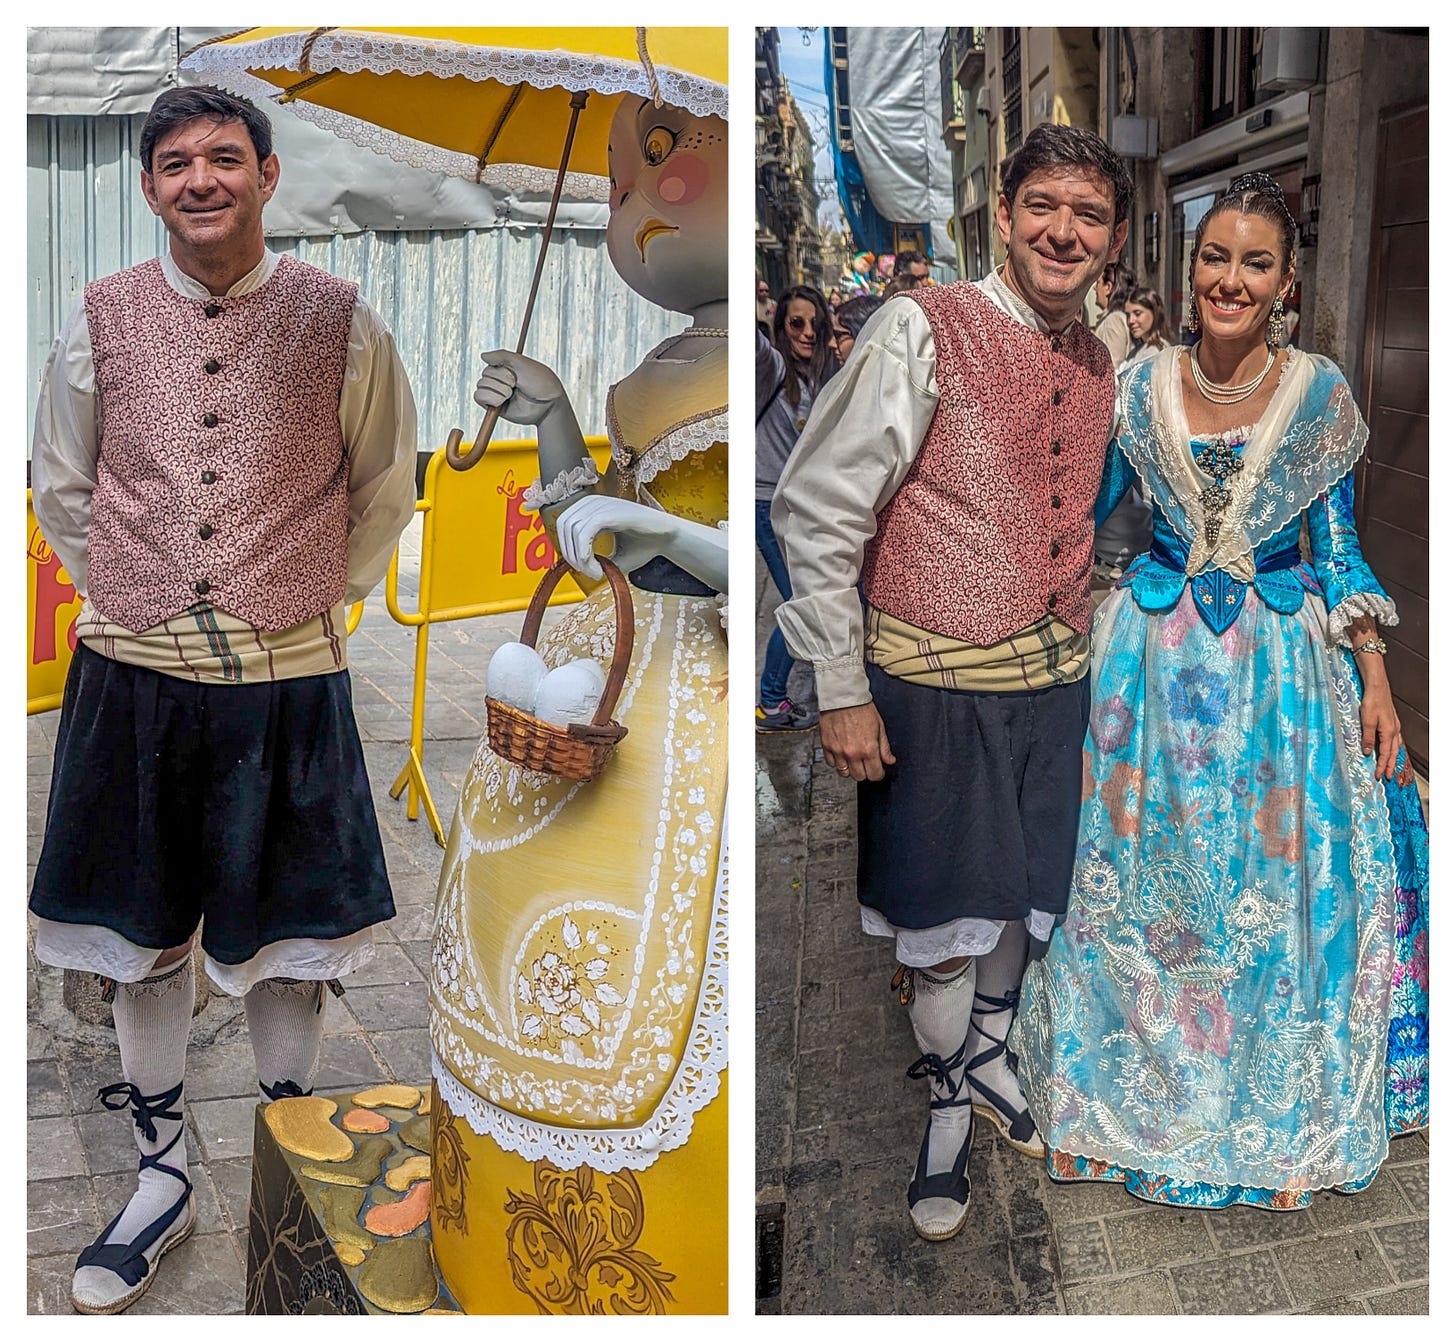 Marcelino, wearing a traditional costume and posing next to a smaller ninot; second picture, Marcelino with his wife, also in a traditional dress that is blue and covered with a floral pattern.